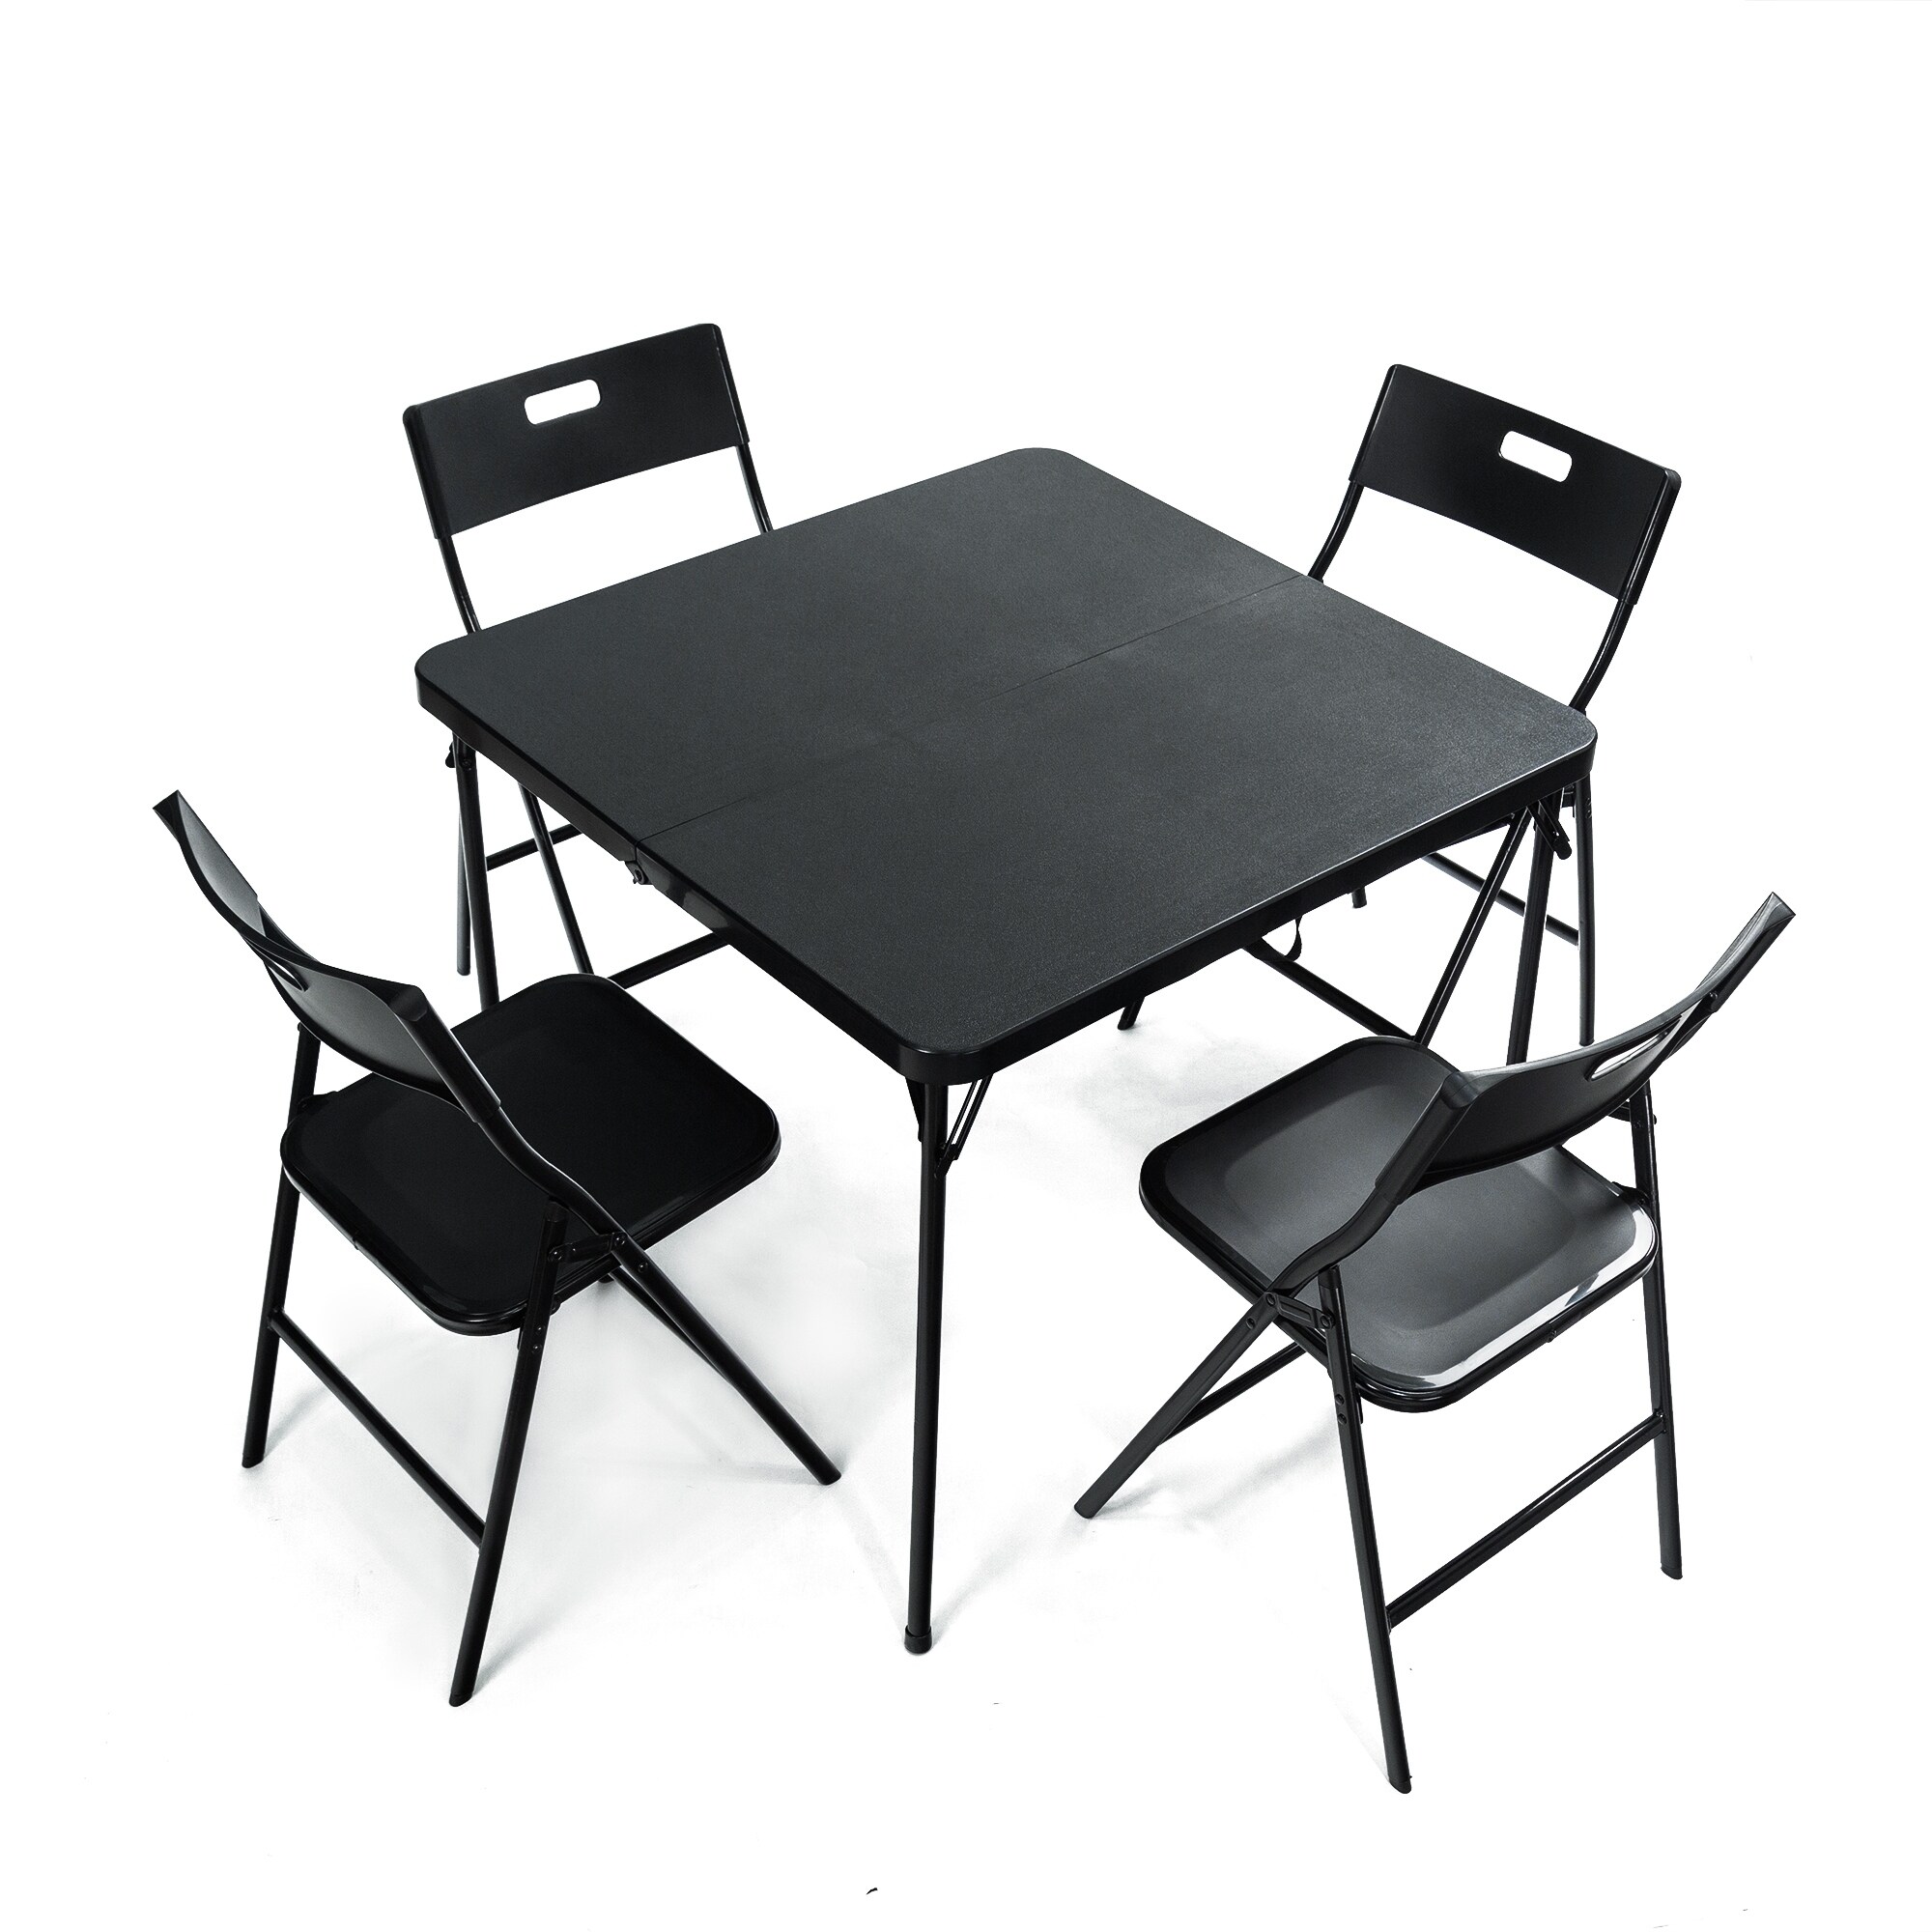 5 Pieces Folding Table And Chair Set 1+4 Tabletop Can Be Folded In Half Space Saving Metal Legs Patio Furniture,